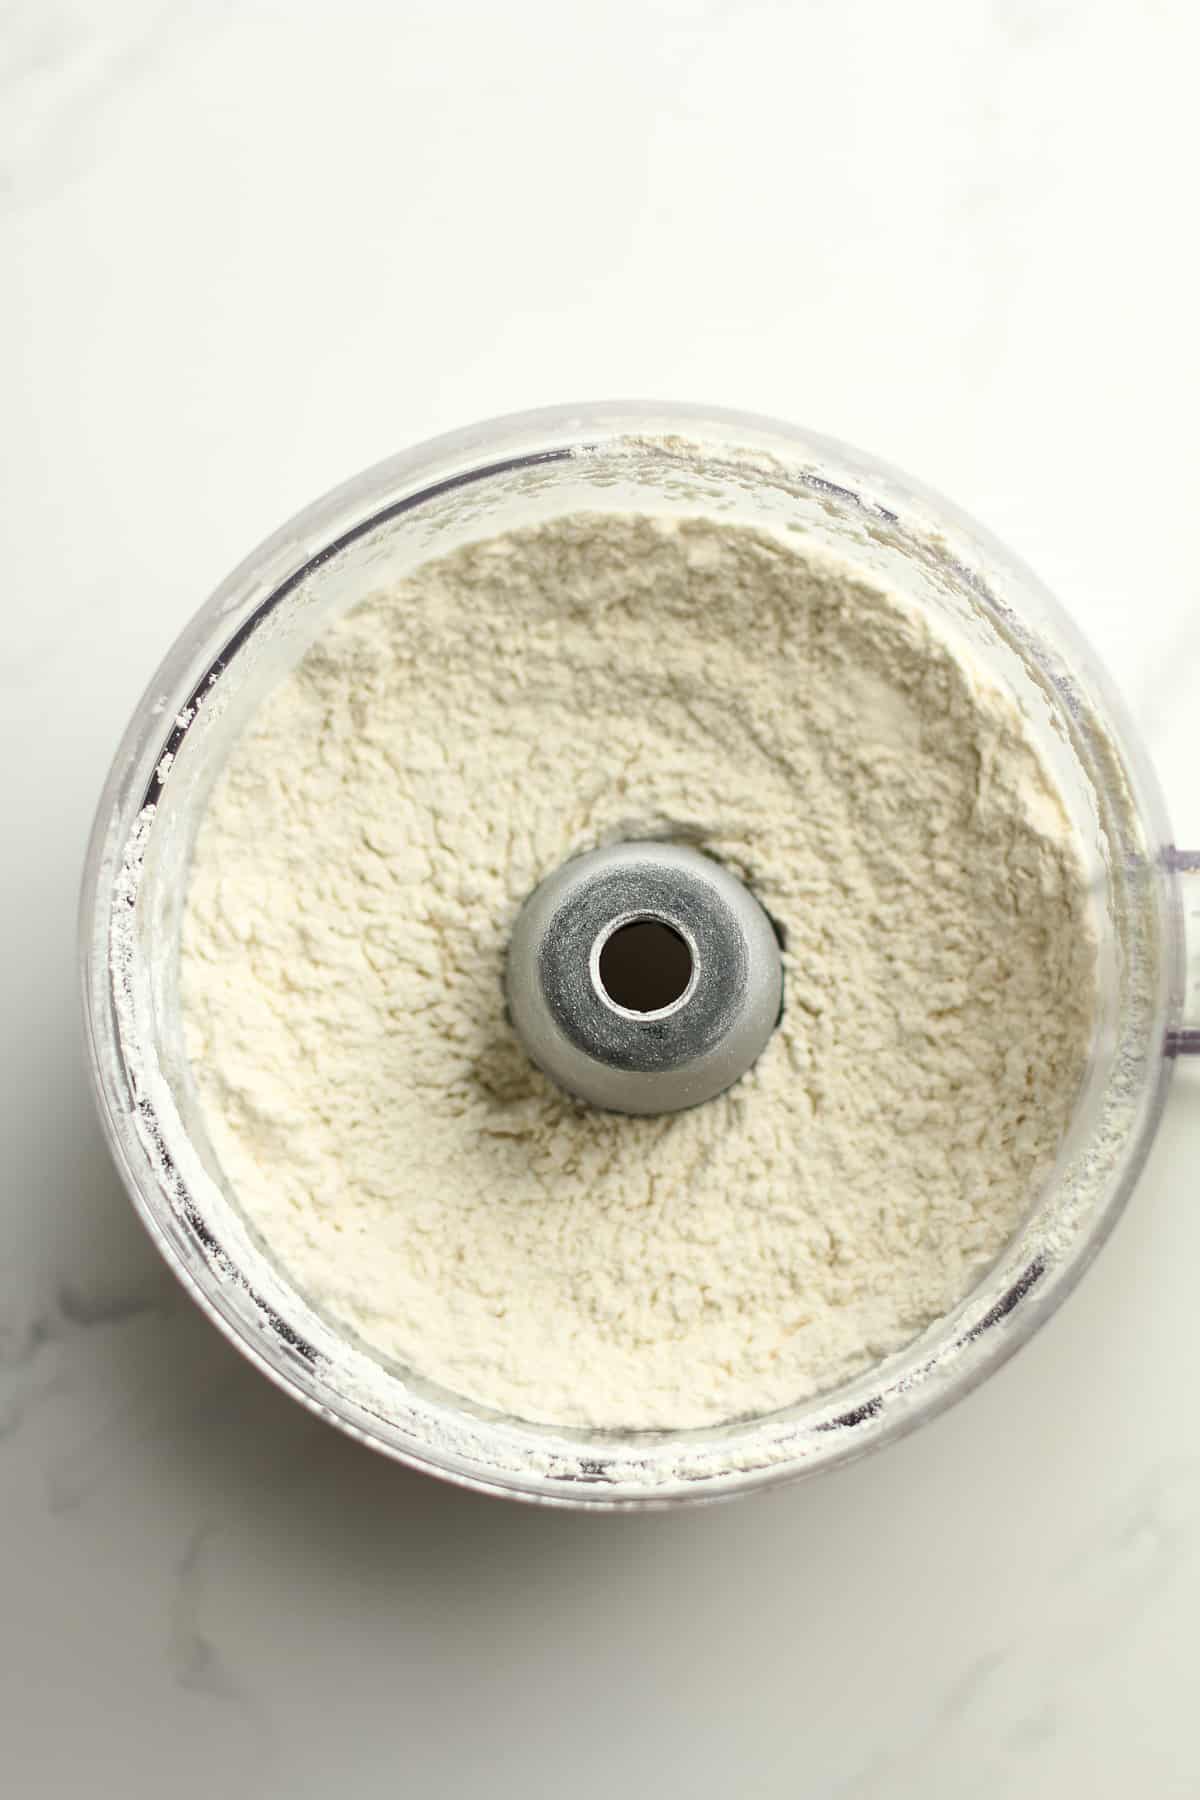 A food processor filled with flour.